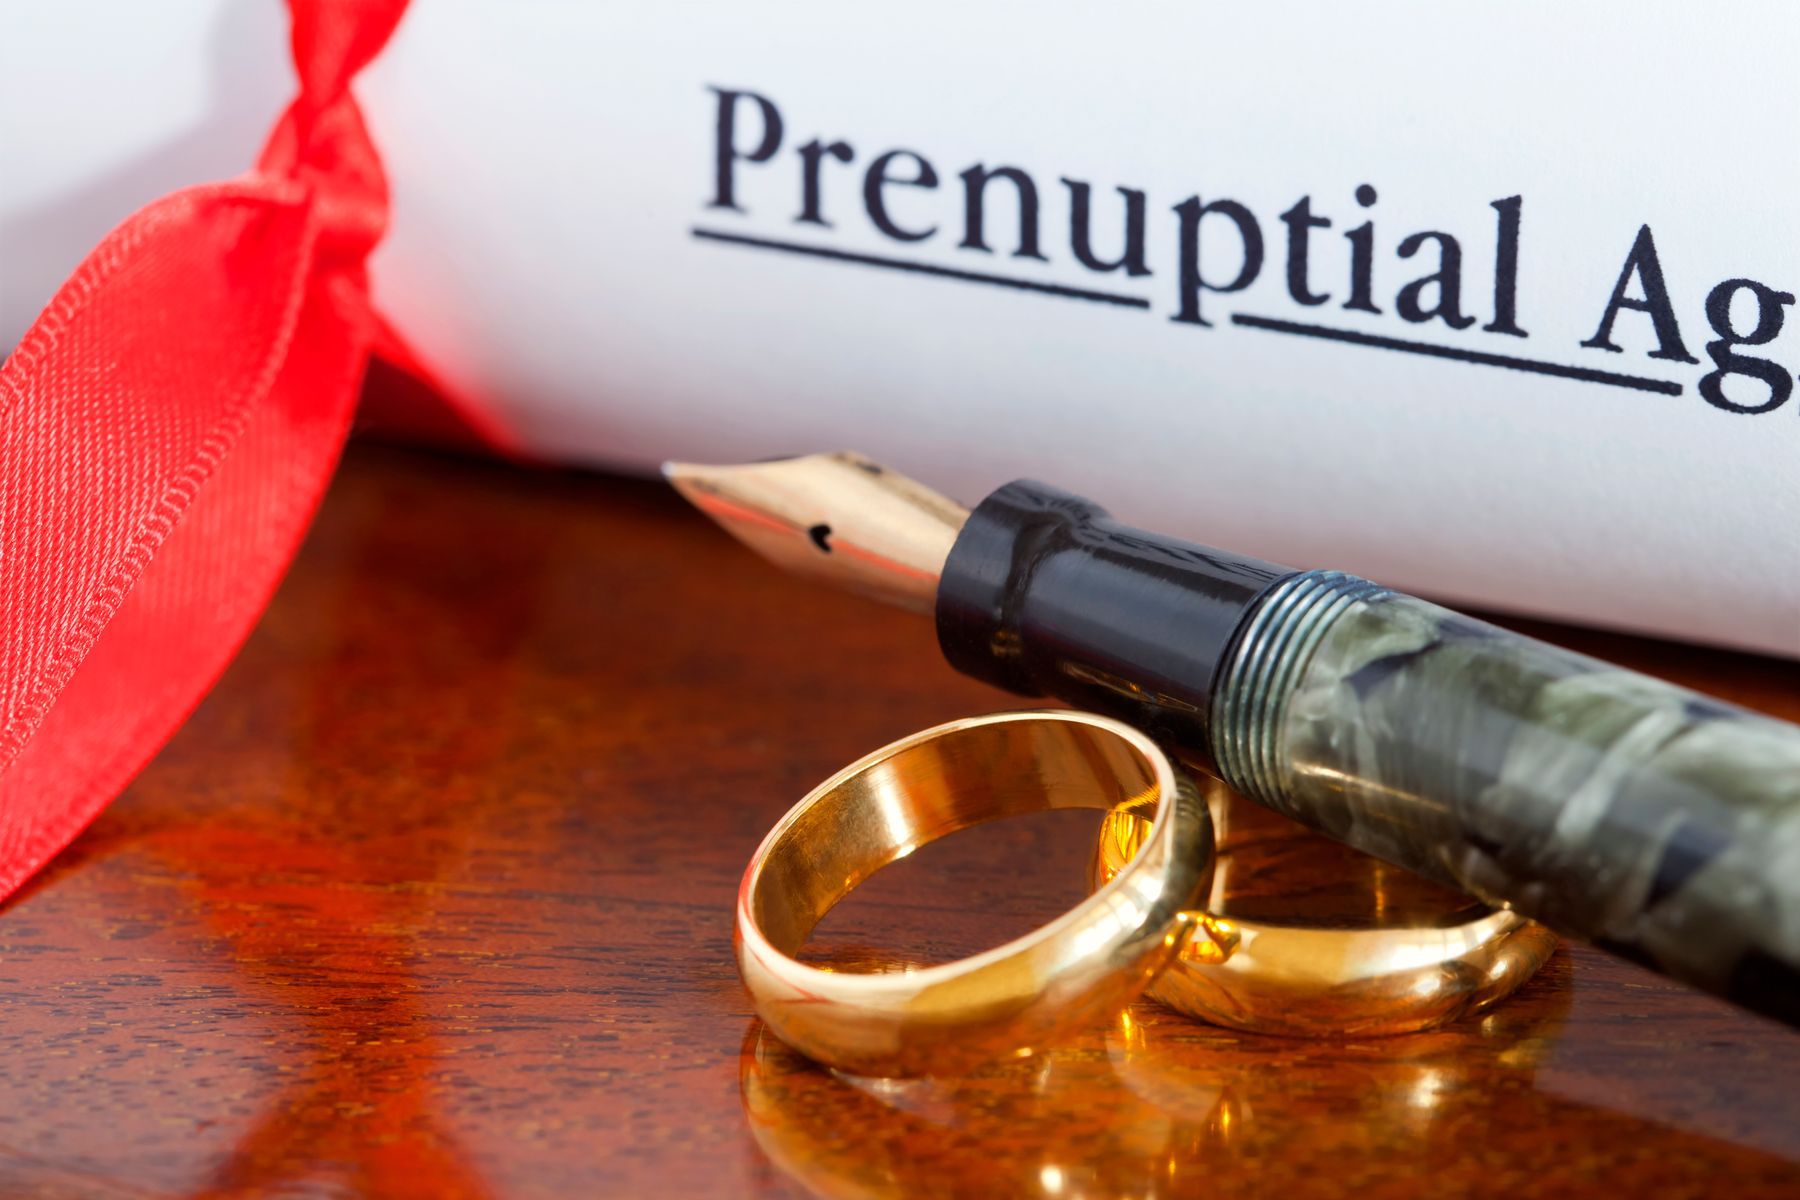 Prenuptial Agreements What You Need to Know